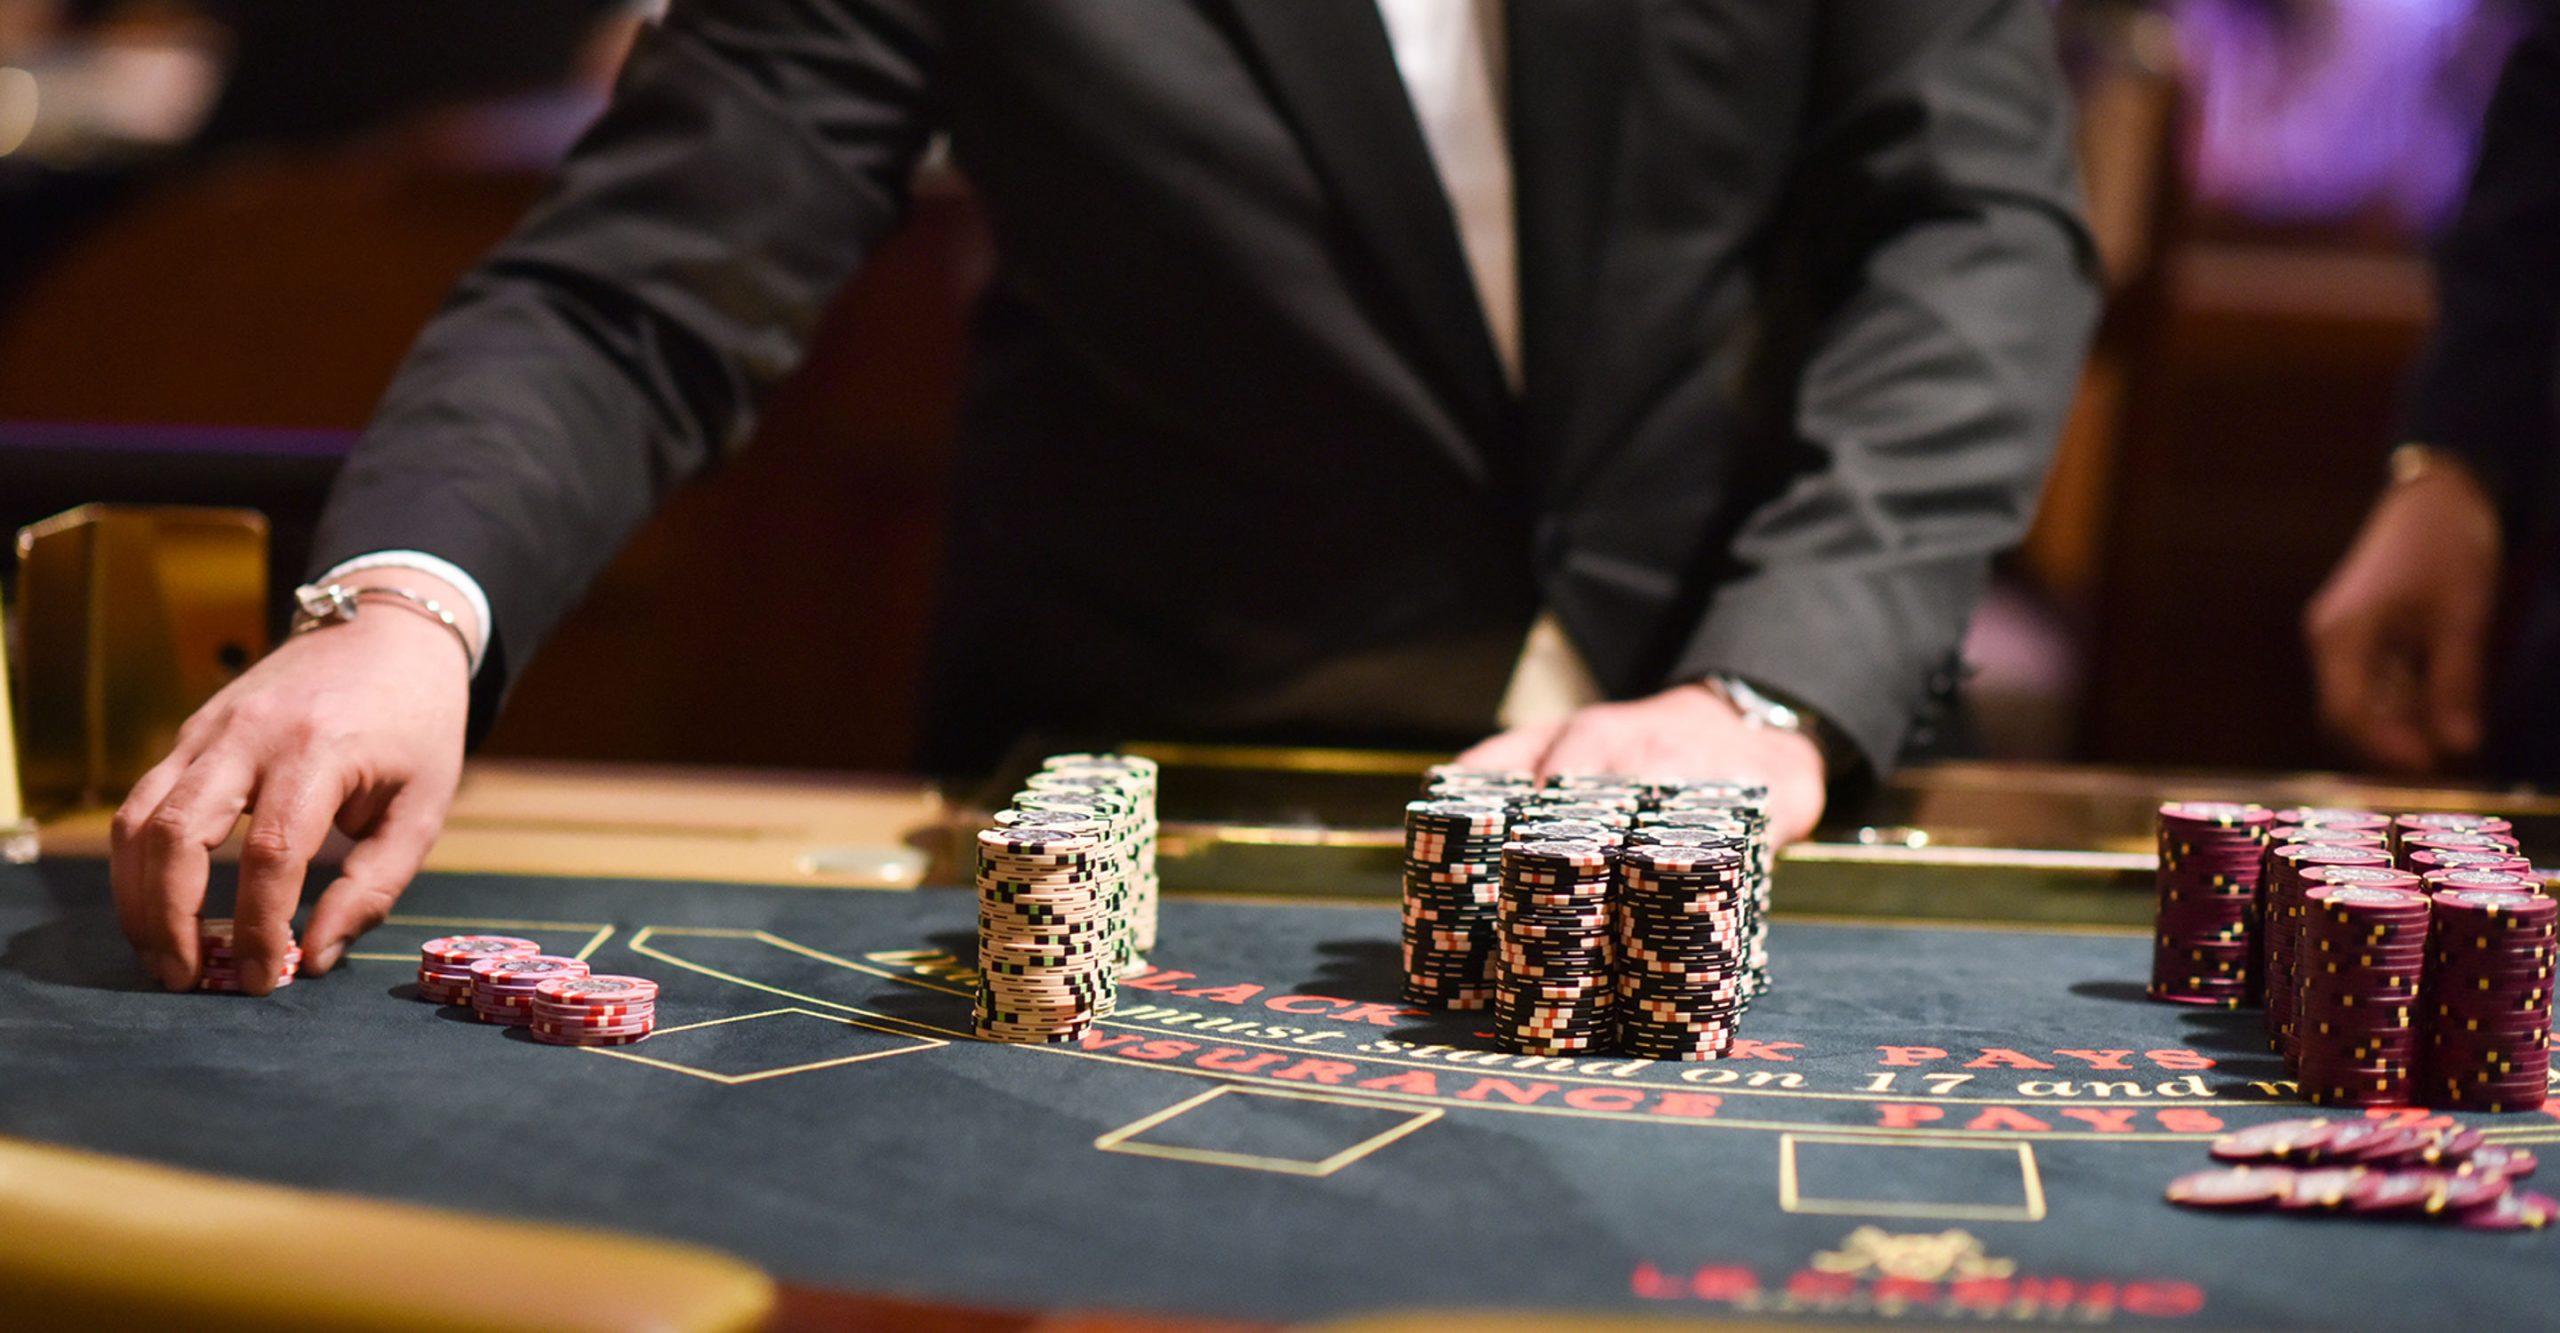 918kiss vs. Competing Casinos: Which Is Better?